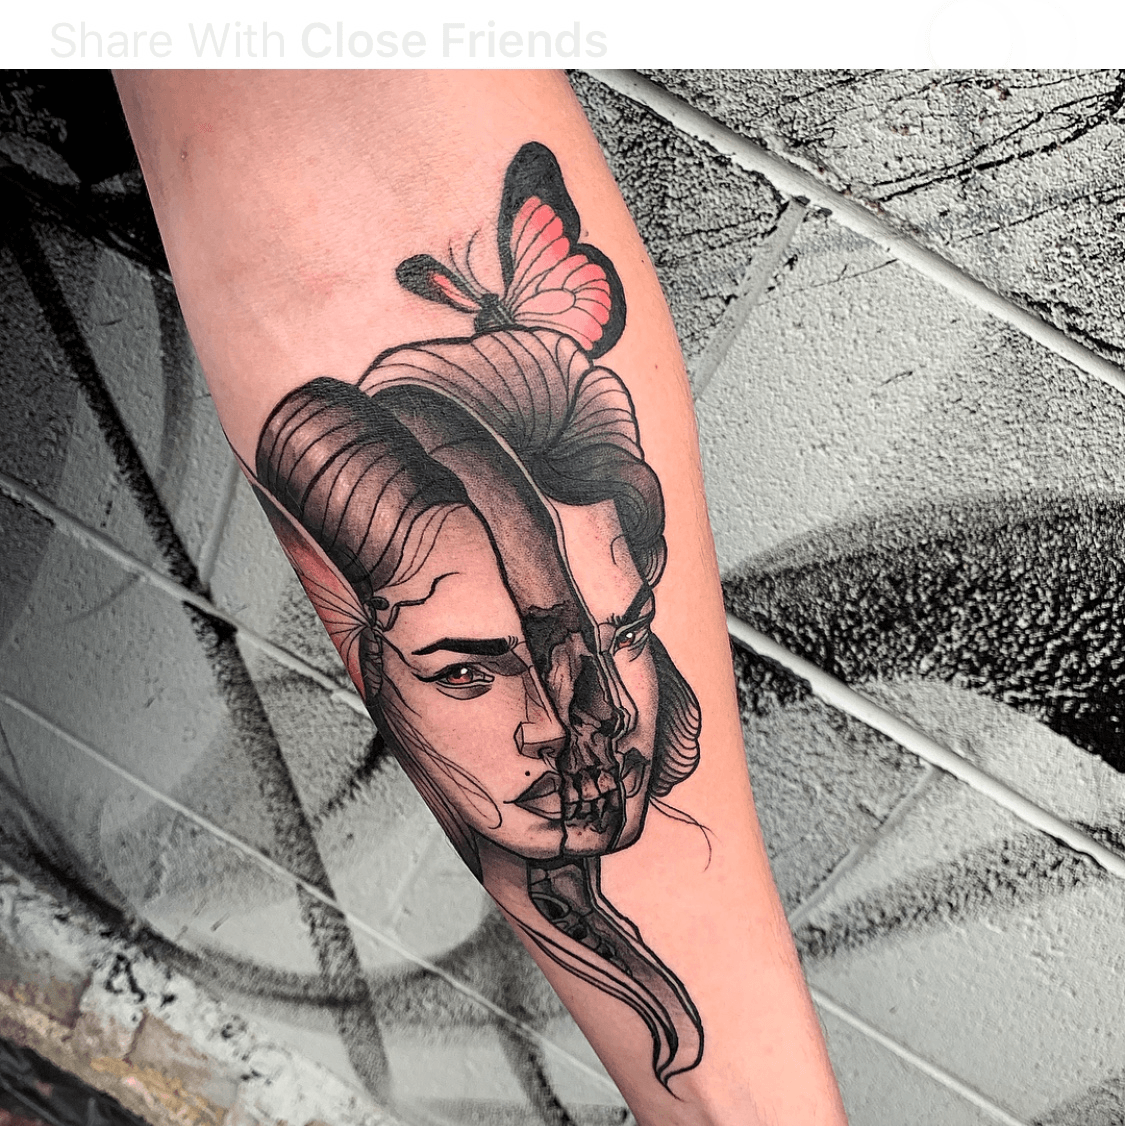 Split head with deadly nightshade Gillian at Tooth and Nail Tattoo  Singapore  rtattoos